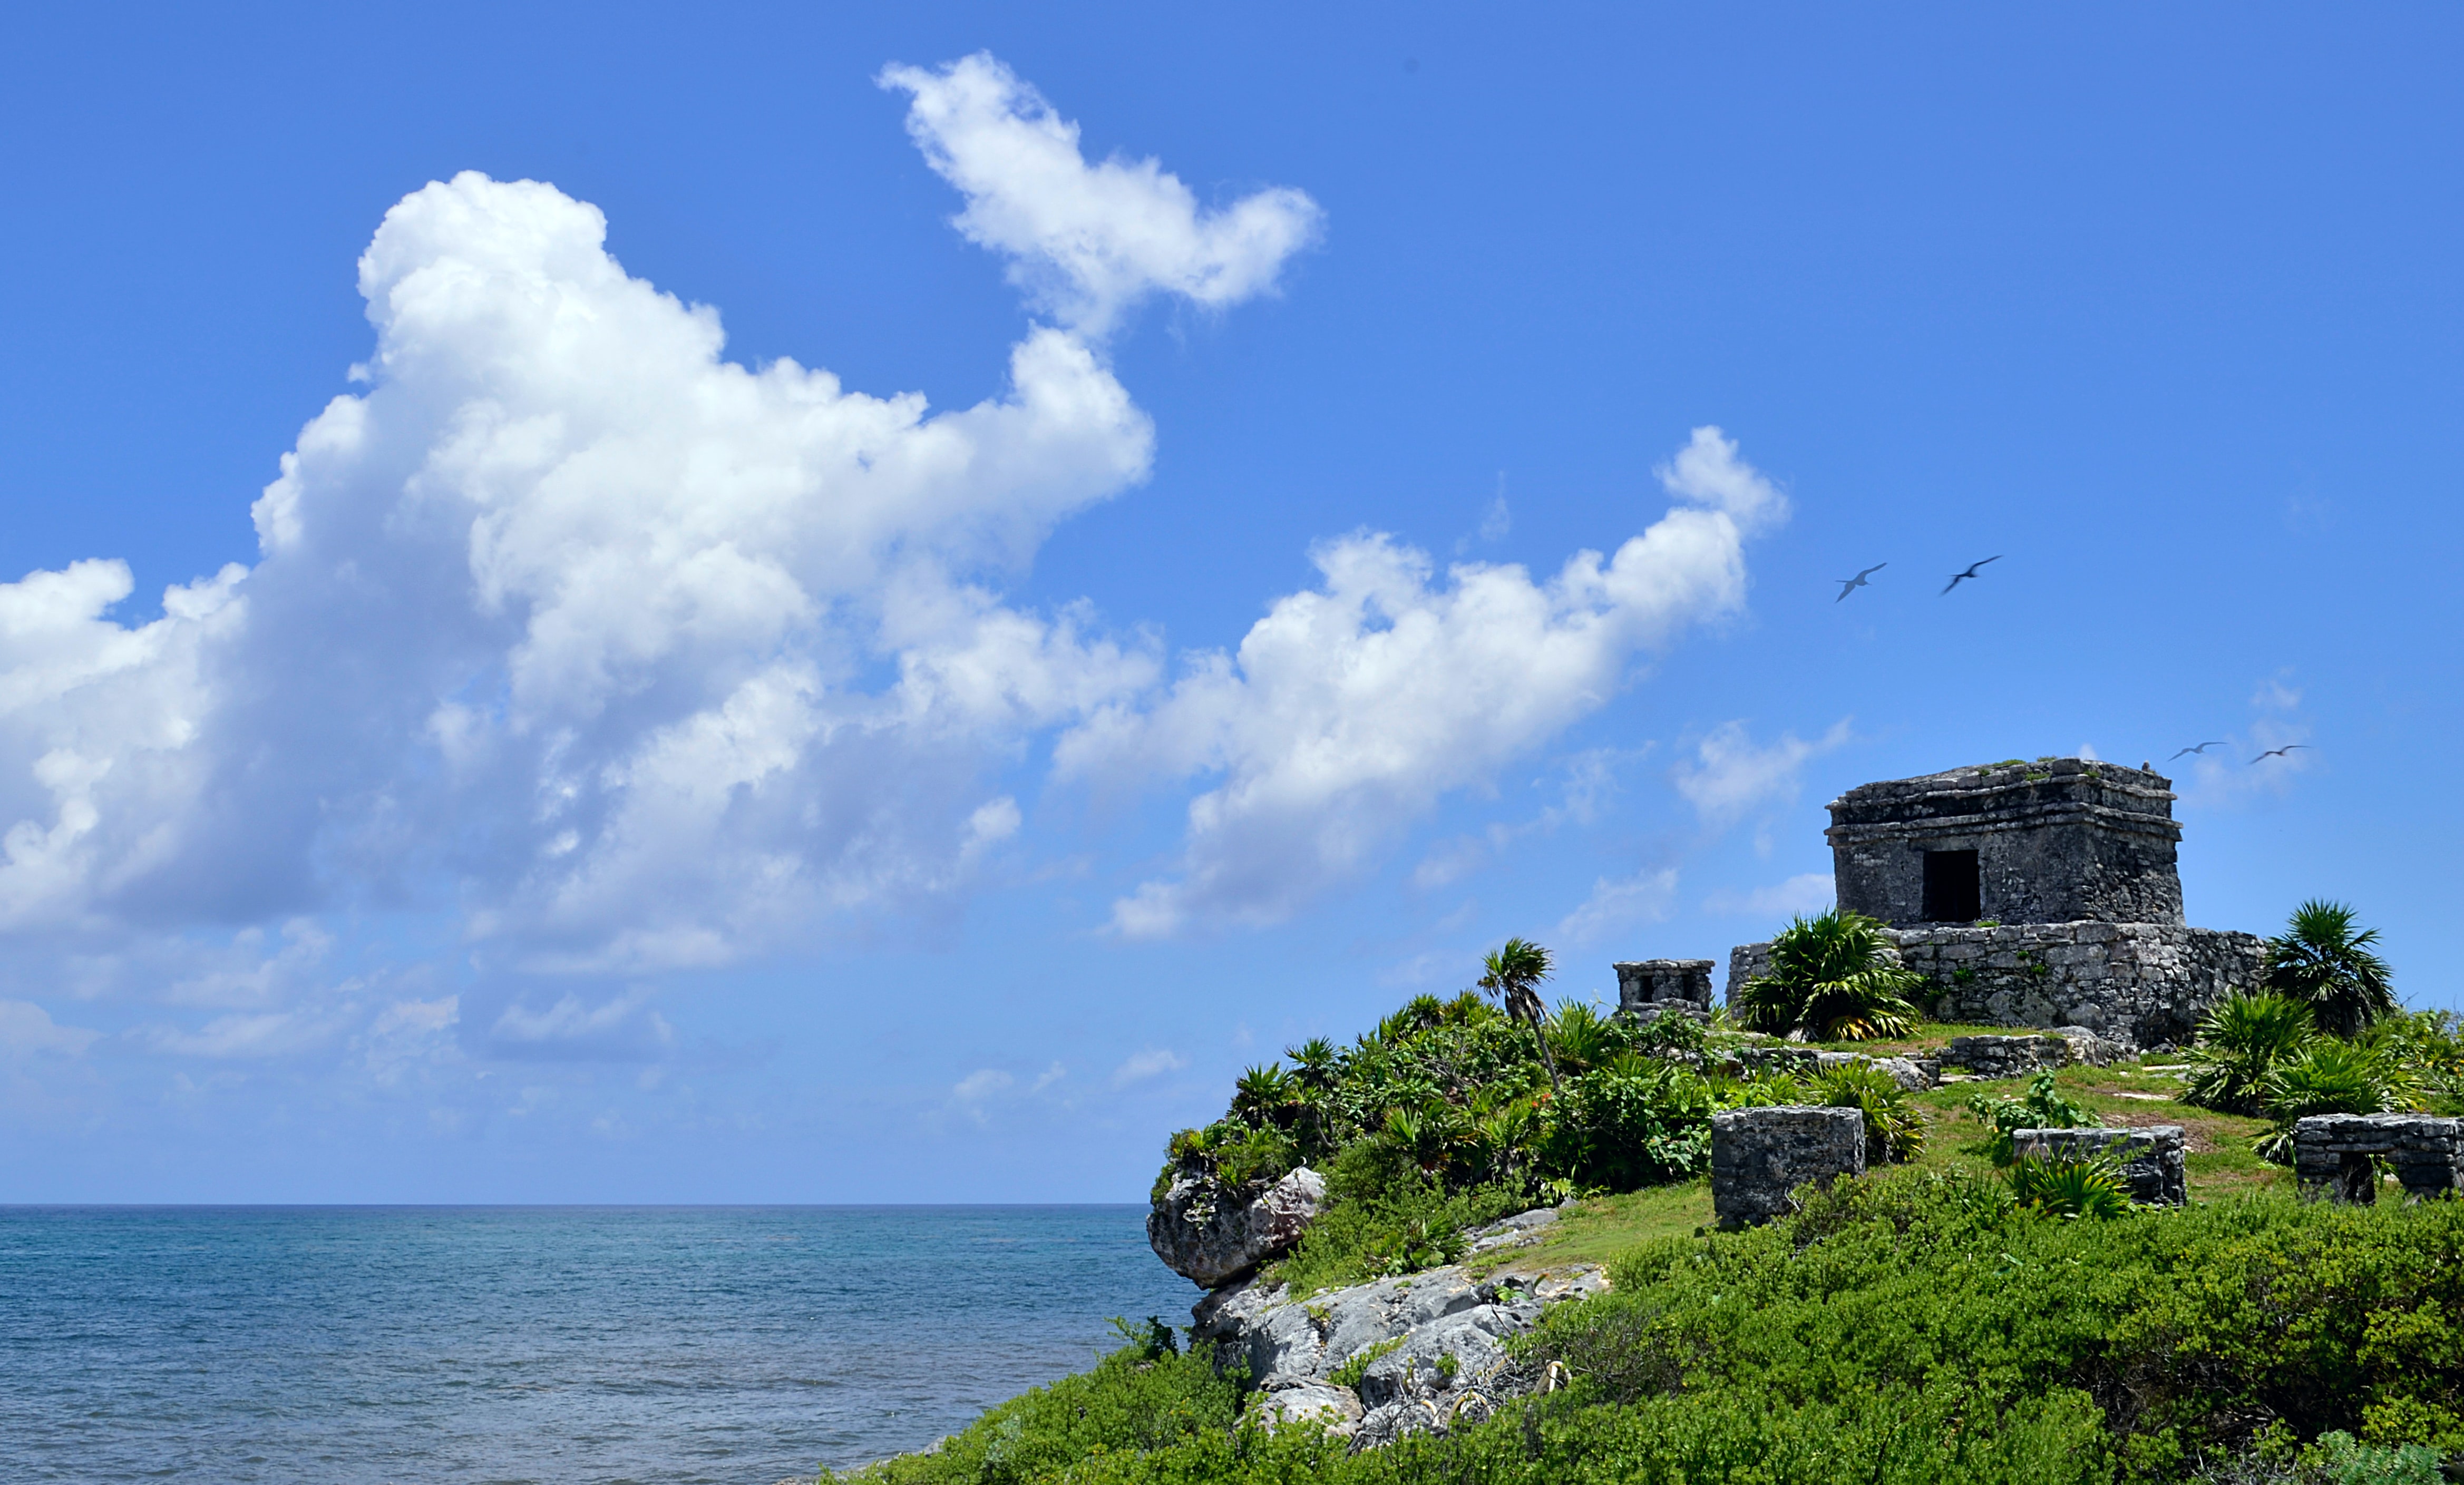 View of the ruins of Tulum and the natural surroundings